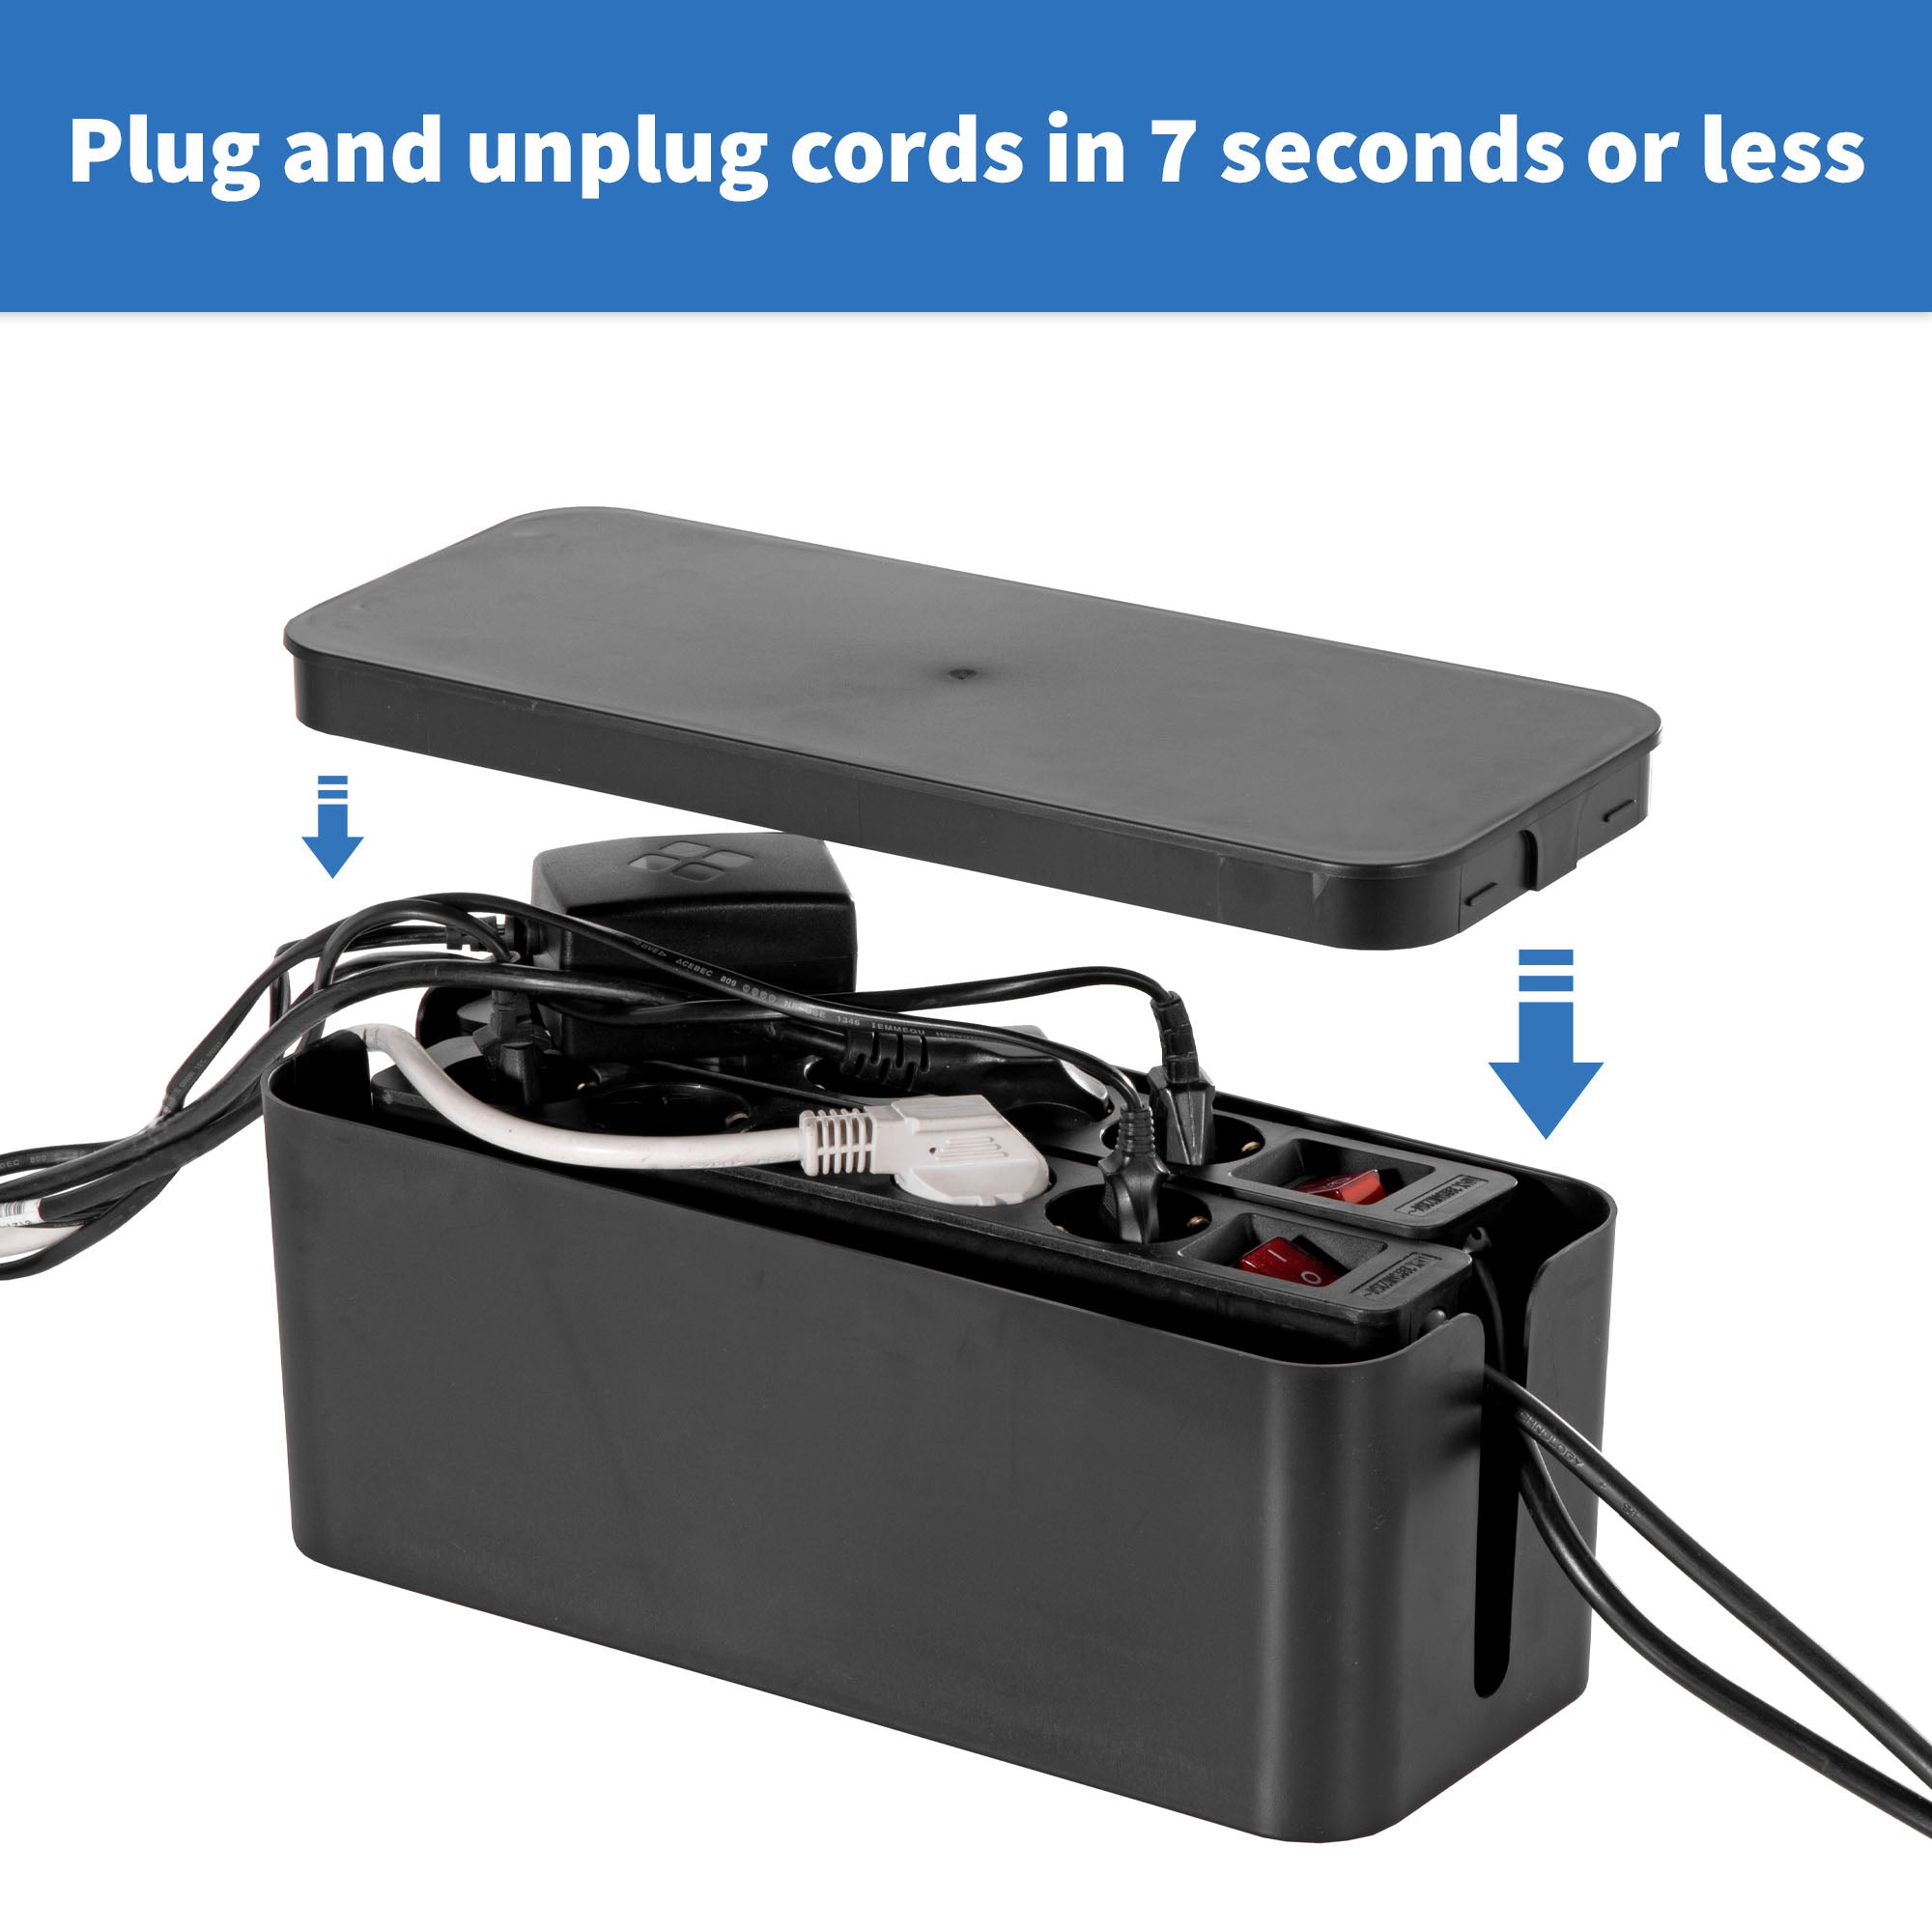 Blue Key World Cable Management Box - Hide Cords Home Organizer Tool, Power Strip Cover, Baby Proof & Pets Electric Concealer - Wire Cord Outlet Surge Protector